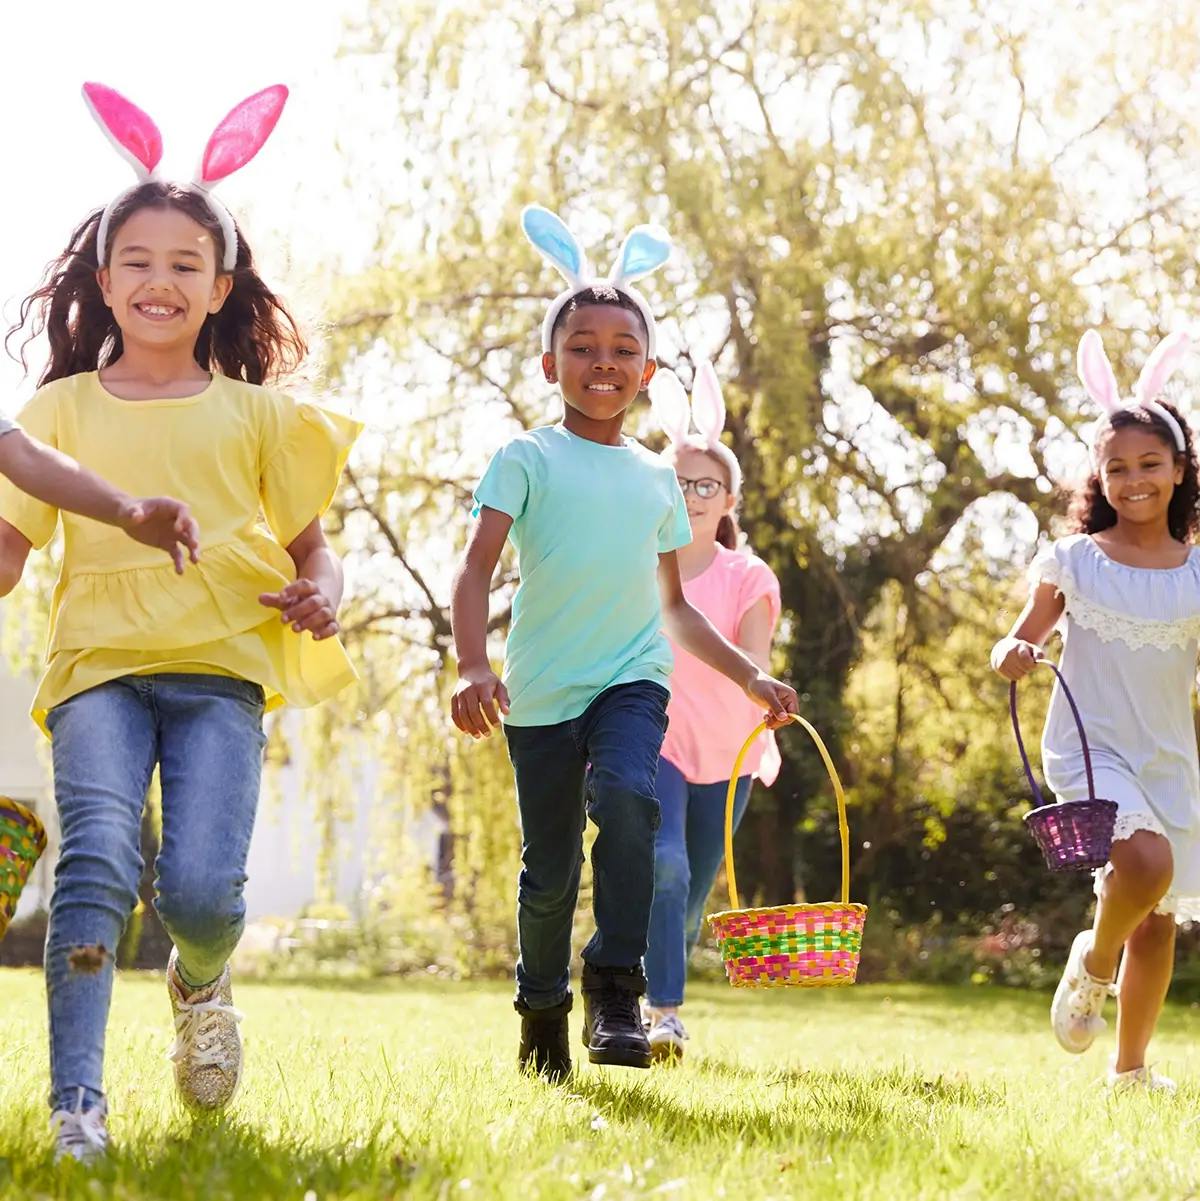 Children wearing bunny ears running to find easter eggs during an easter egg hunt.